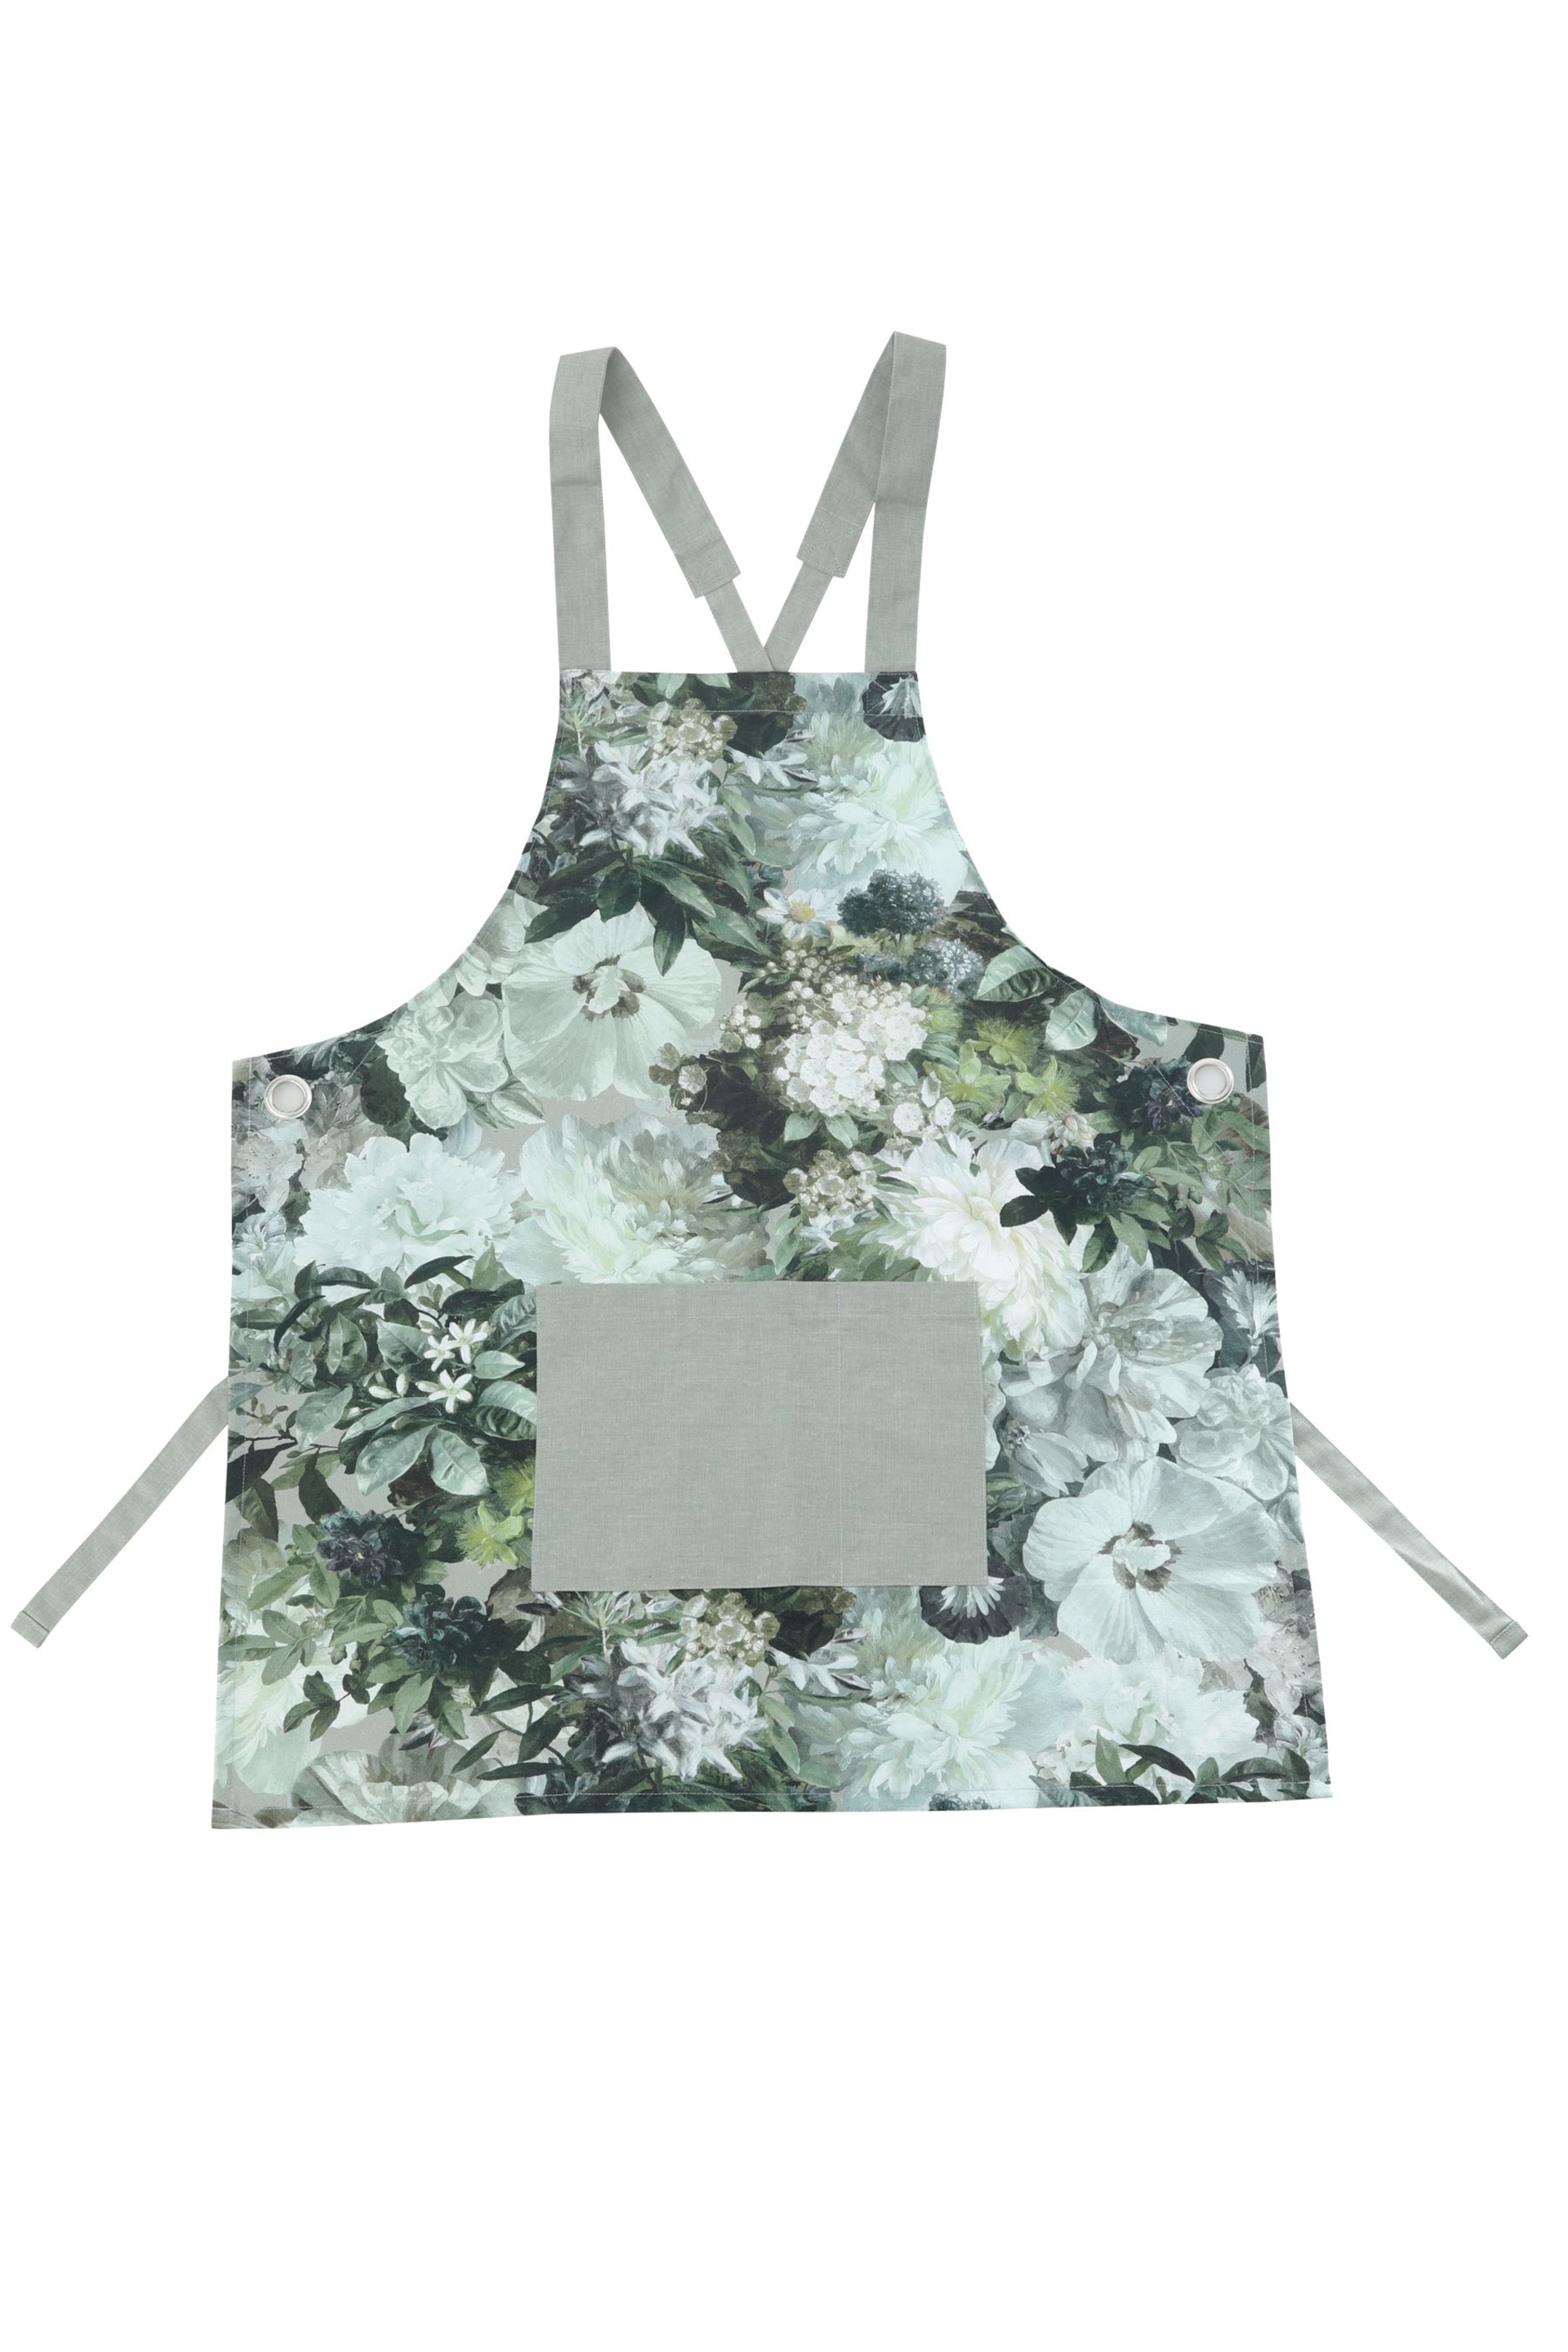 MM Living Green Floral Apron - Image 1 of 1